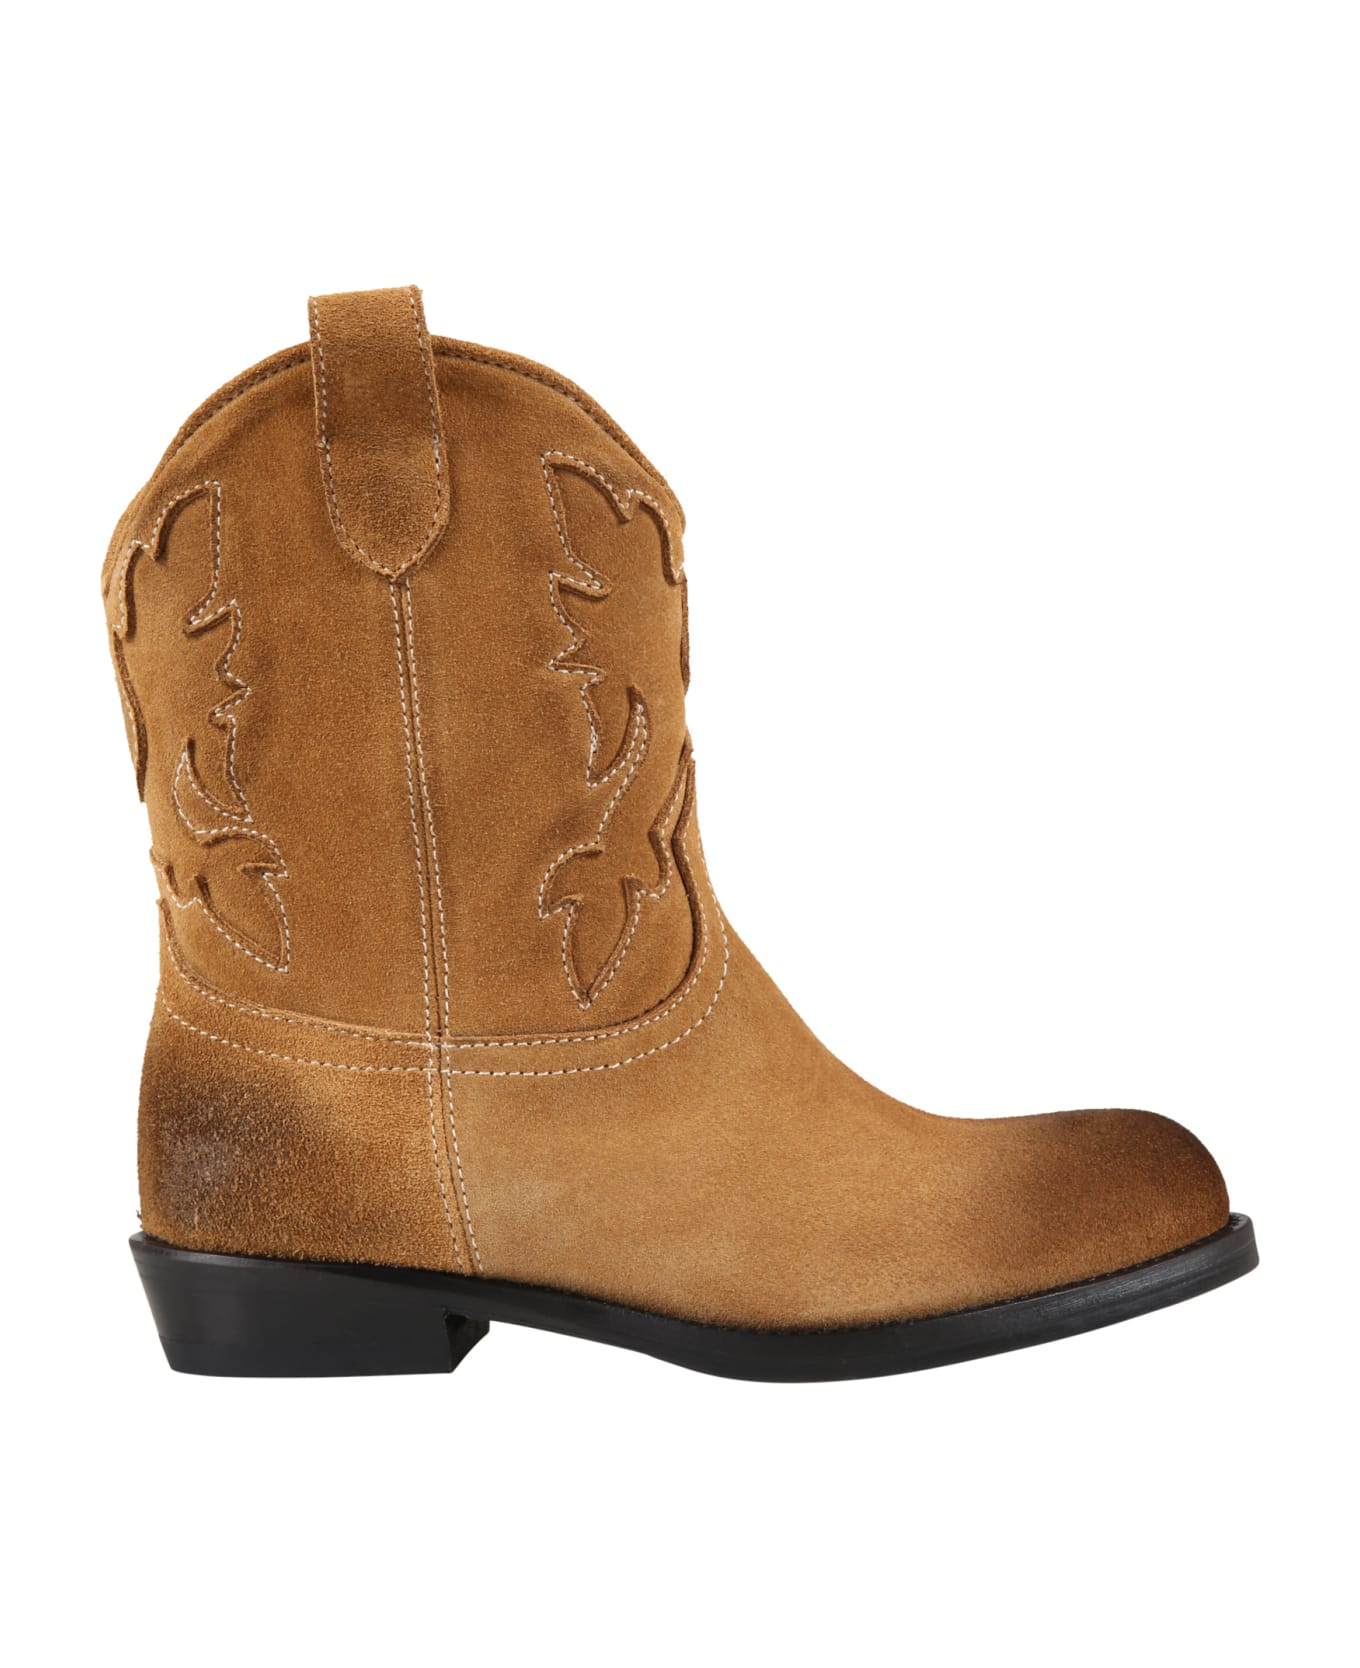 Gallucci Beige Boots For Kids - Brown